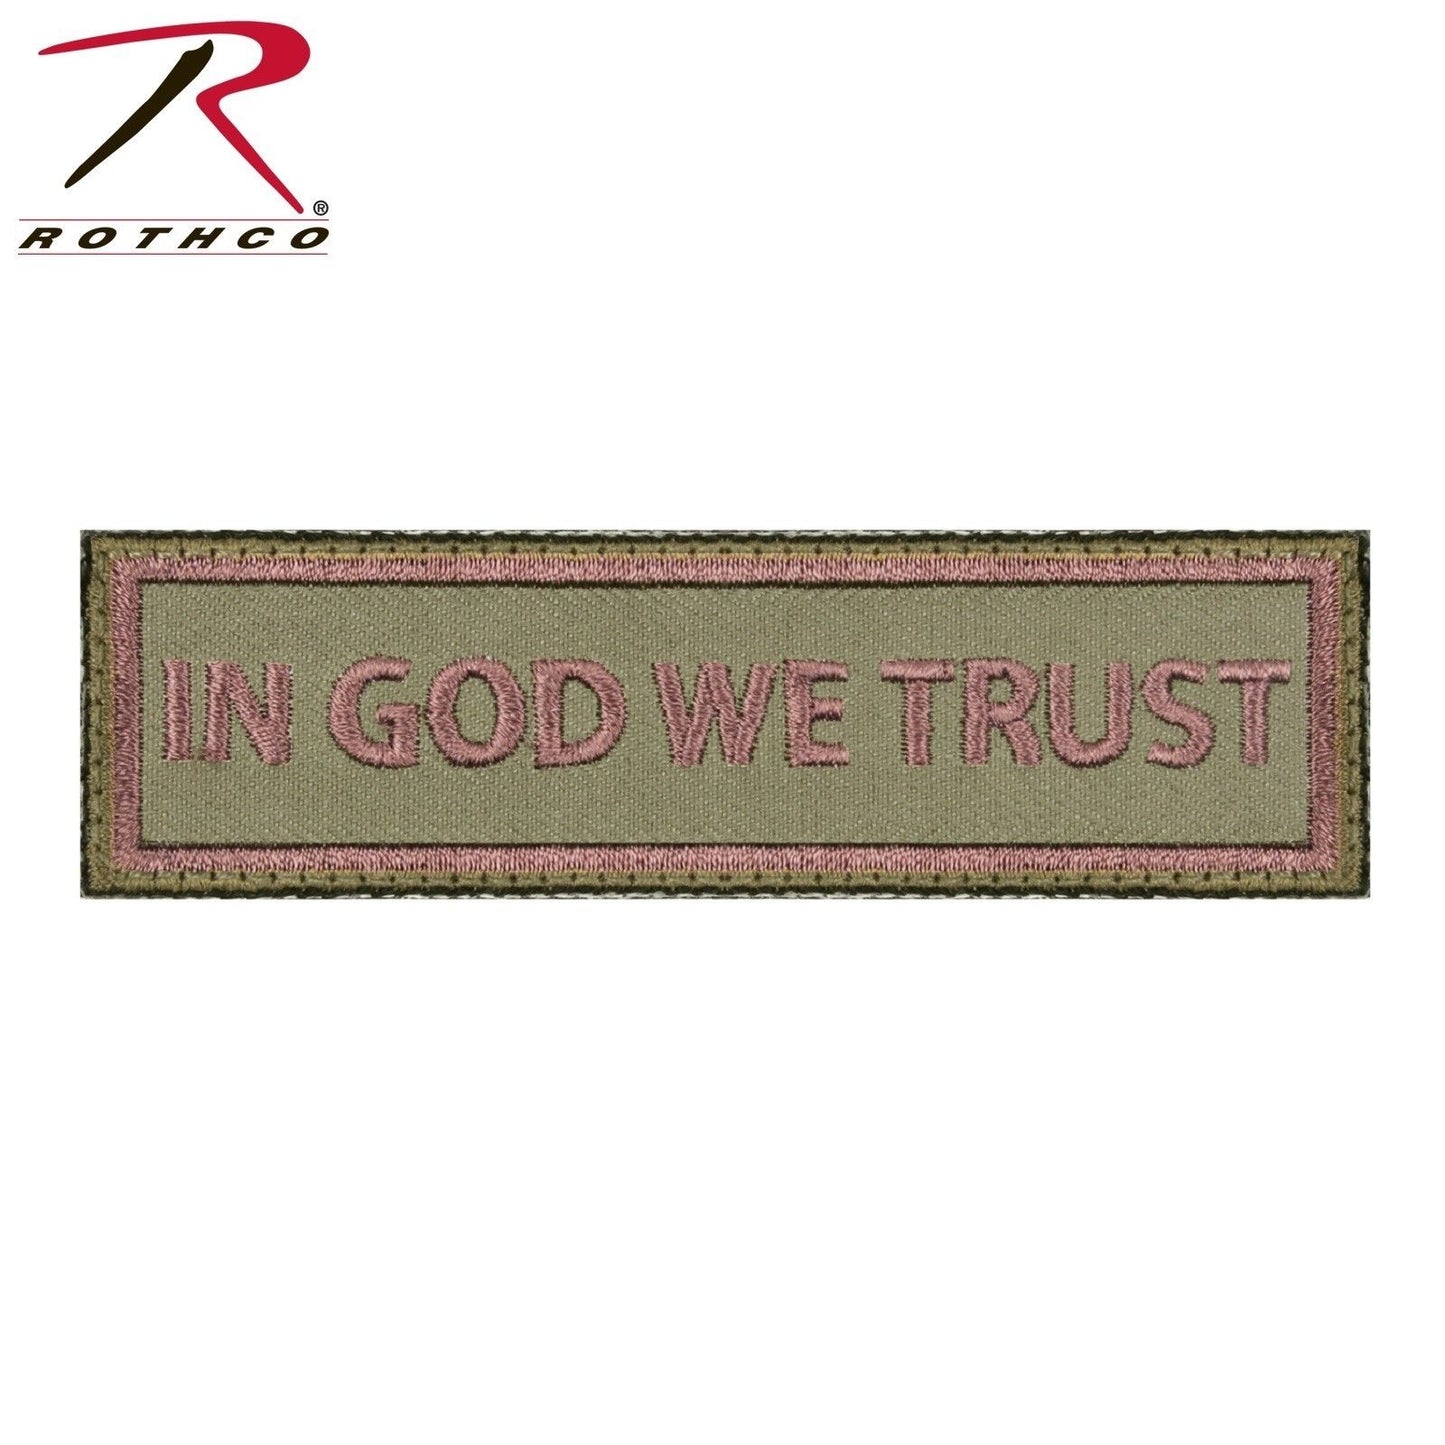 Rothco "In God We Trust" Morale Patch - Rectangular Hook & Loop Tactical Patch